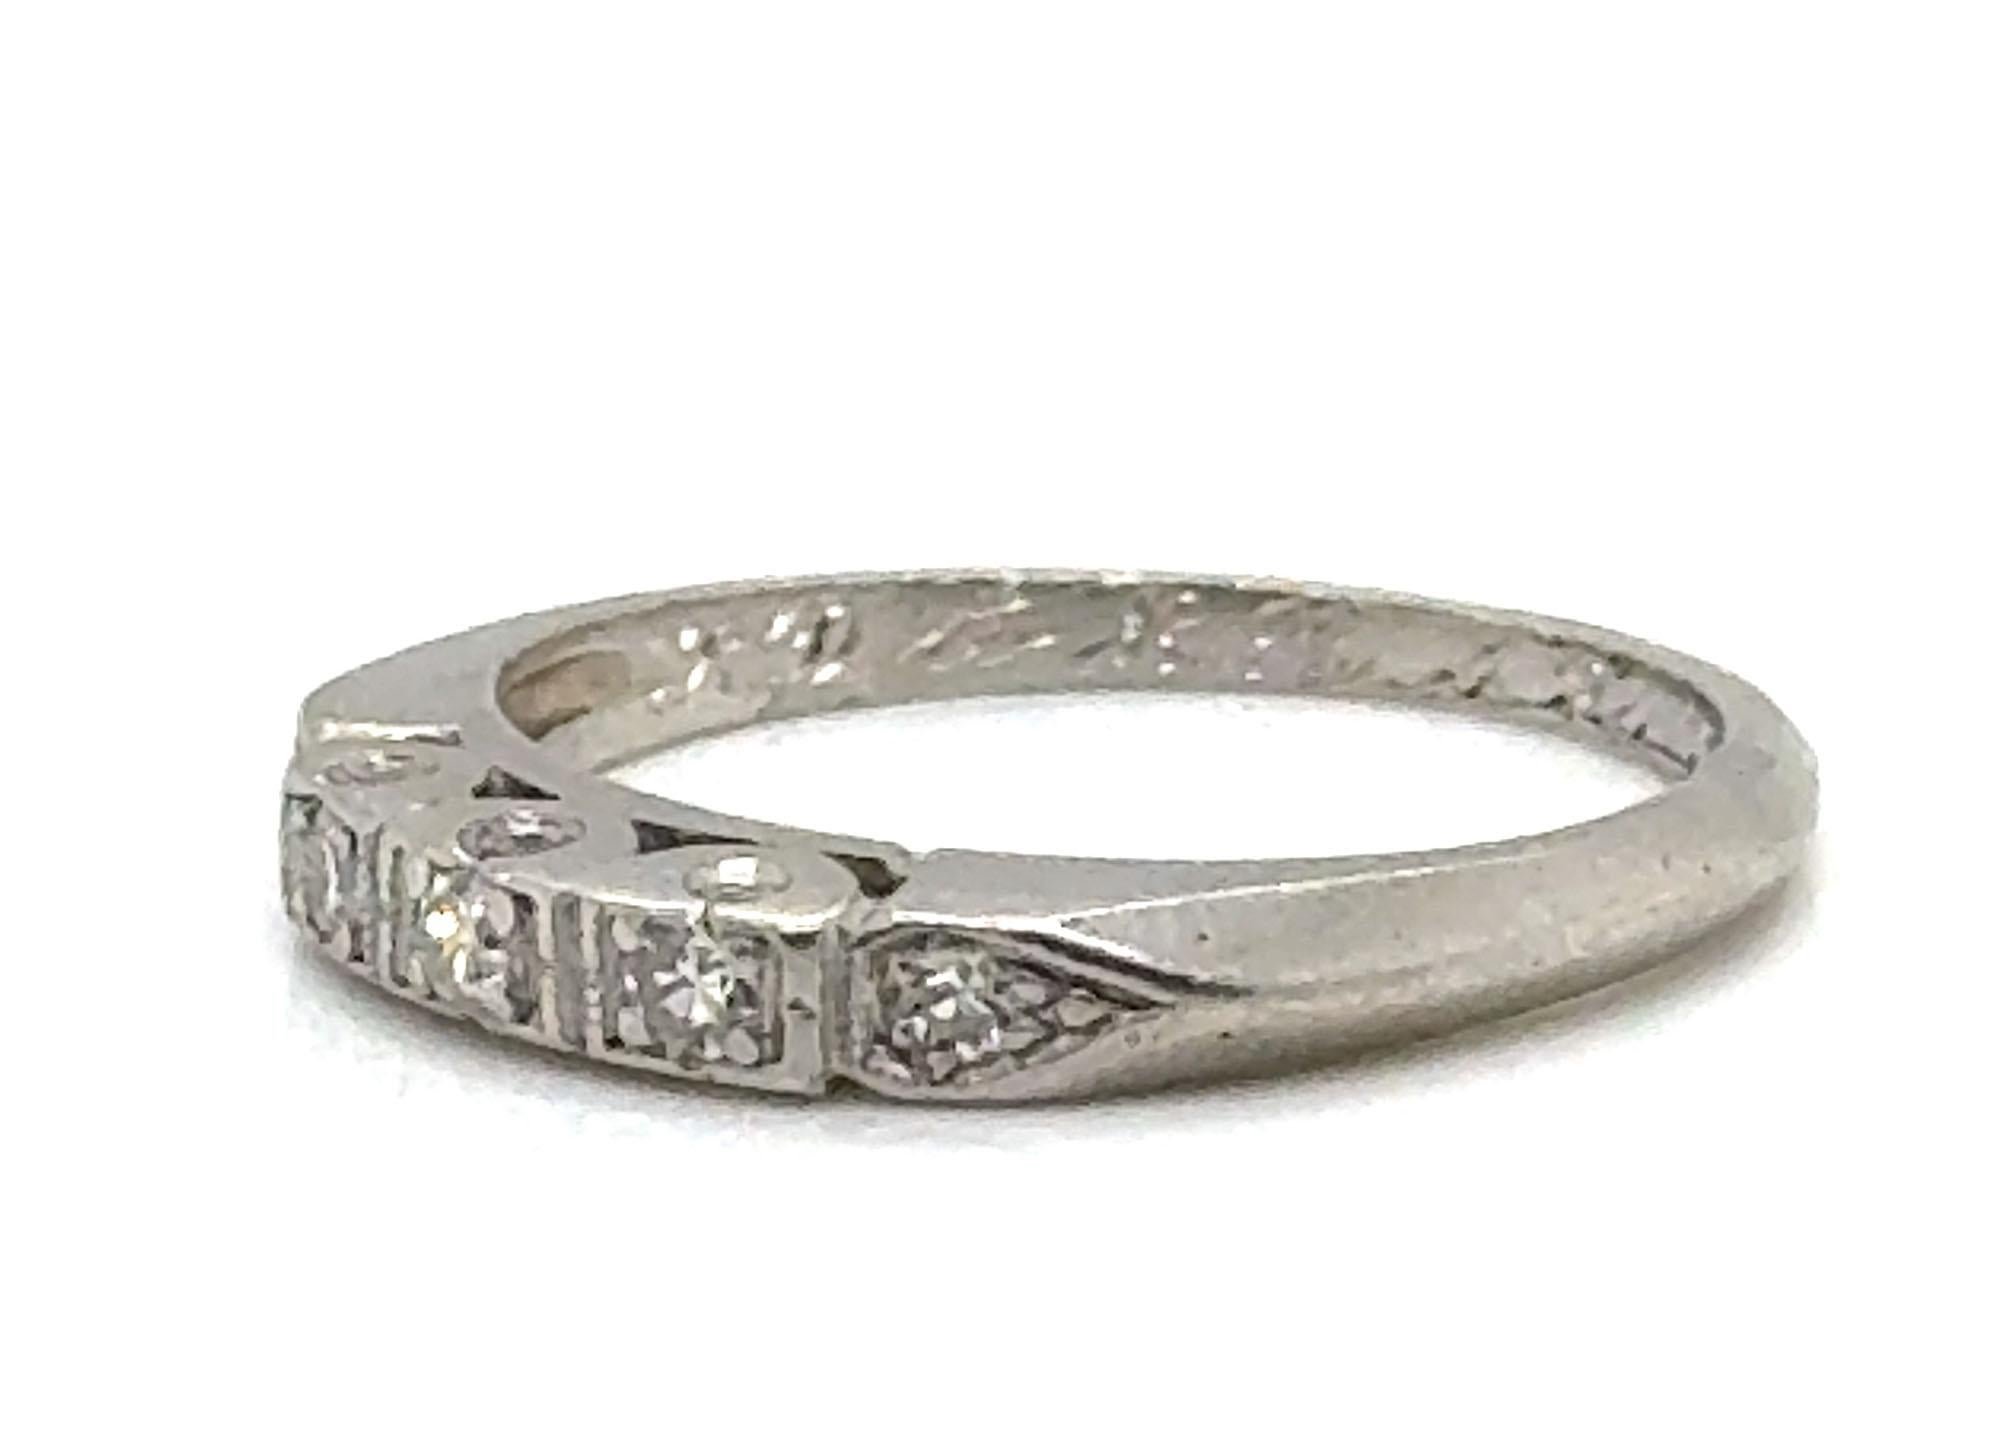 Genuine Original Antique Art Deco Dated 4-24-1949 Diamond Anniversary Band Platinum Wedding Ring 



Highlights 5 Matching Clean and Colorless Natural Antique Single-Cut Diamonds.

Ensures 100% Authenticity as Natural Mined Diamonds.

Inside Shank